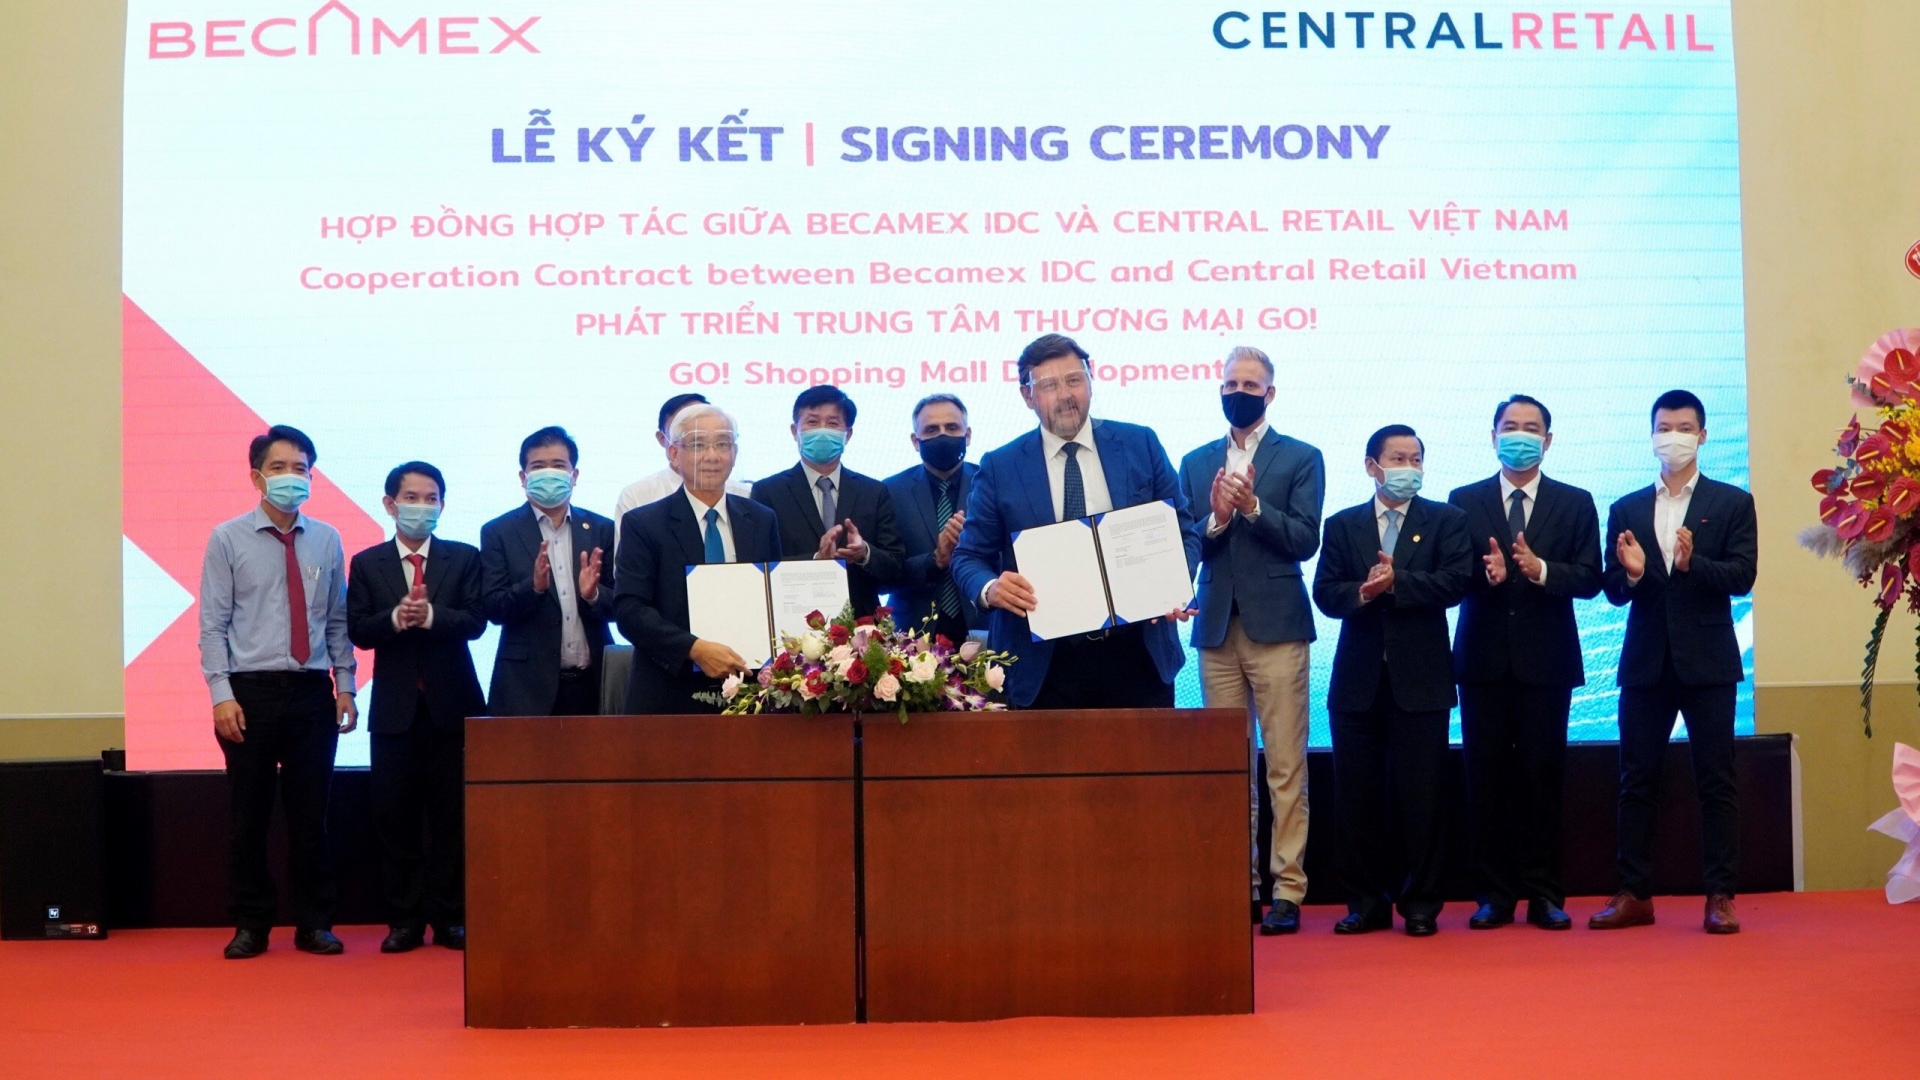 becamex idc and central retail vietnam co develop go shopping mall in binh duong